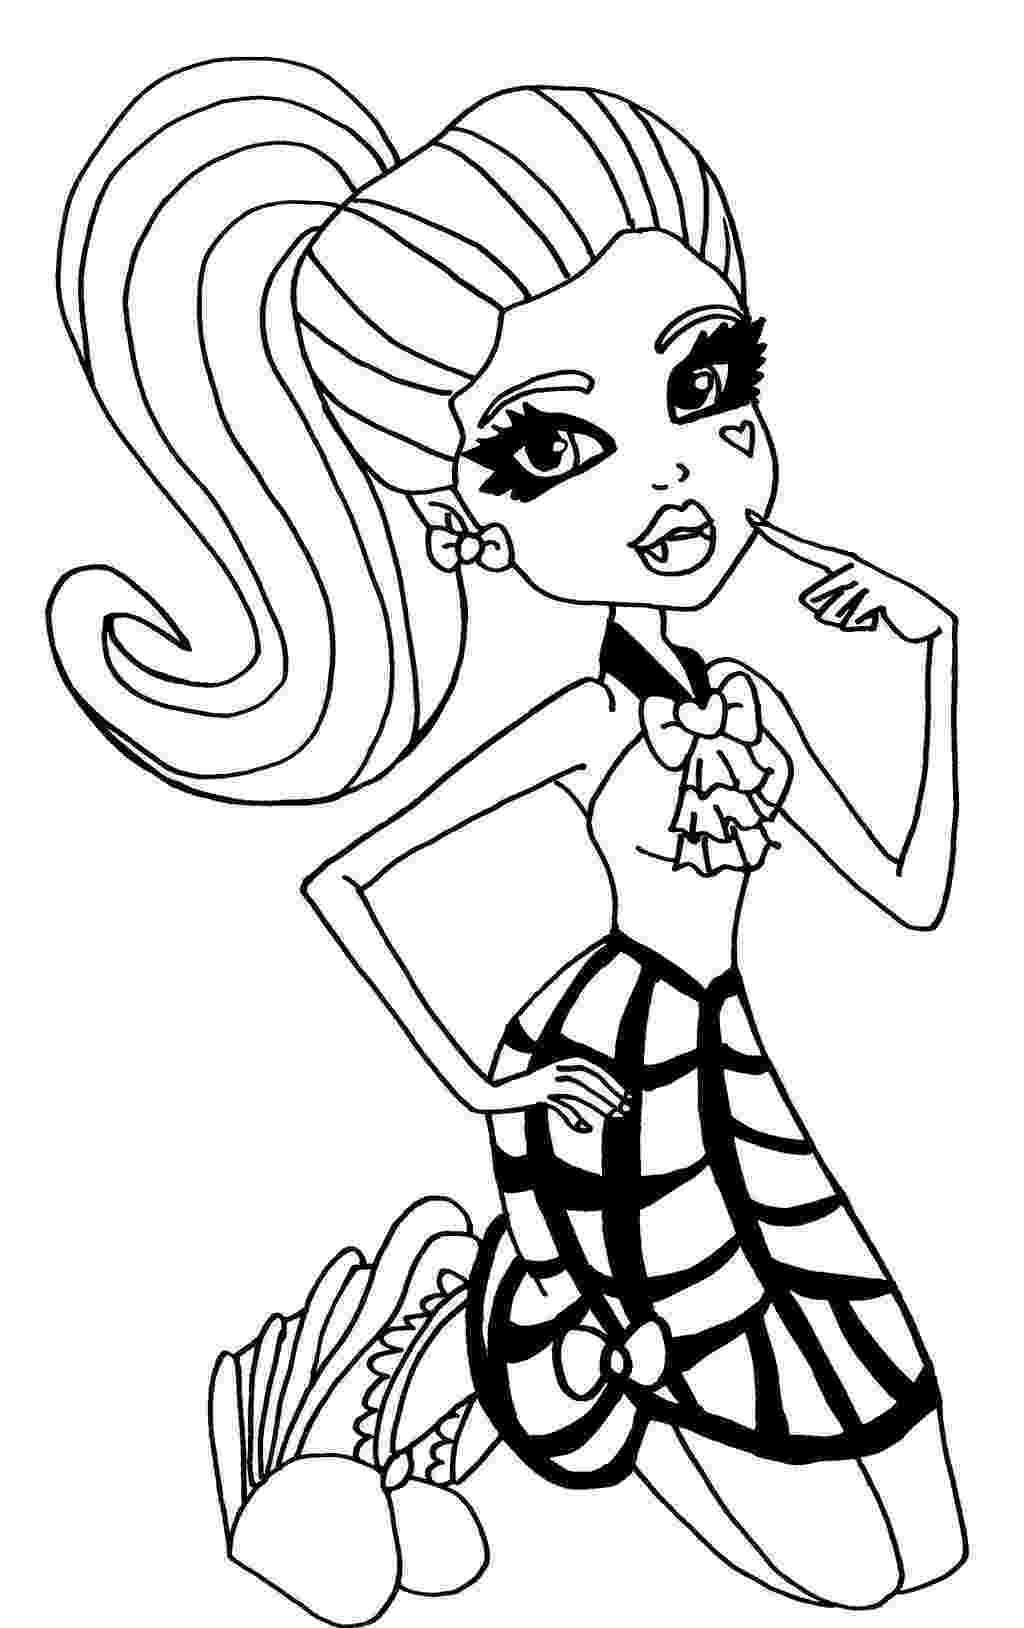 coloring page monster high monster high draculaura coloring page monster high coloring page monster high 